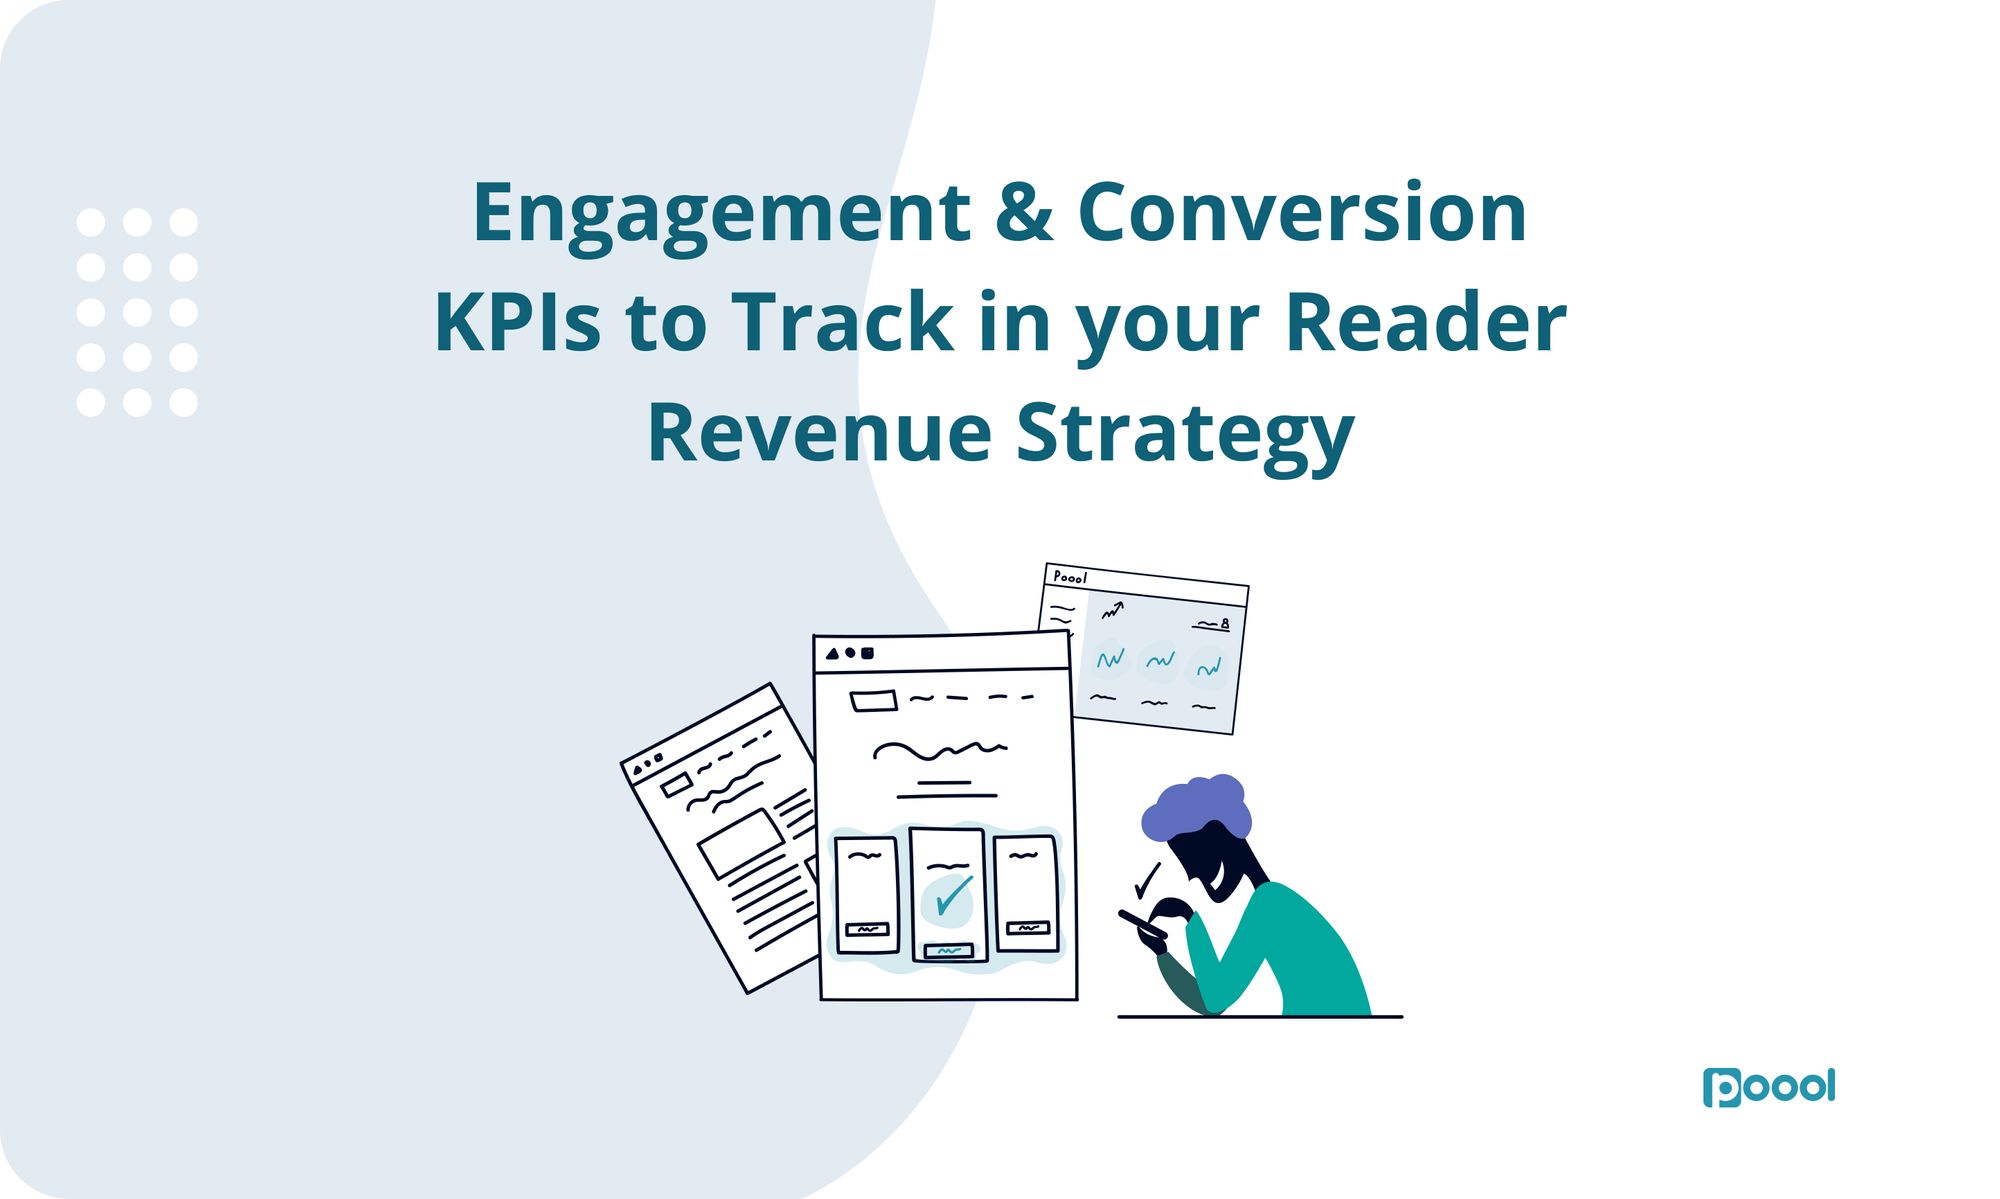 White Paper: The Engagement and Conversion KPIs to Follow for a Successful Reader Revenue Strategy.